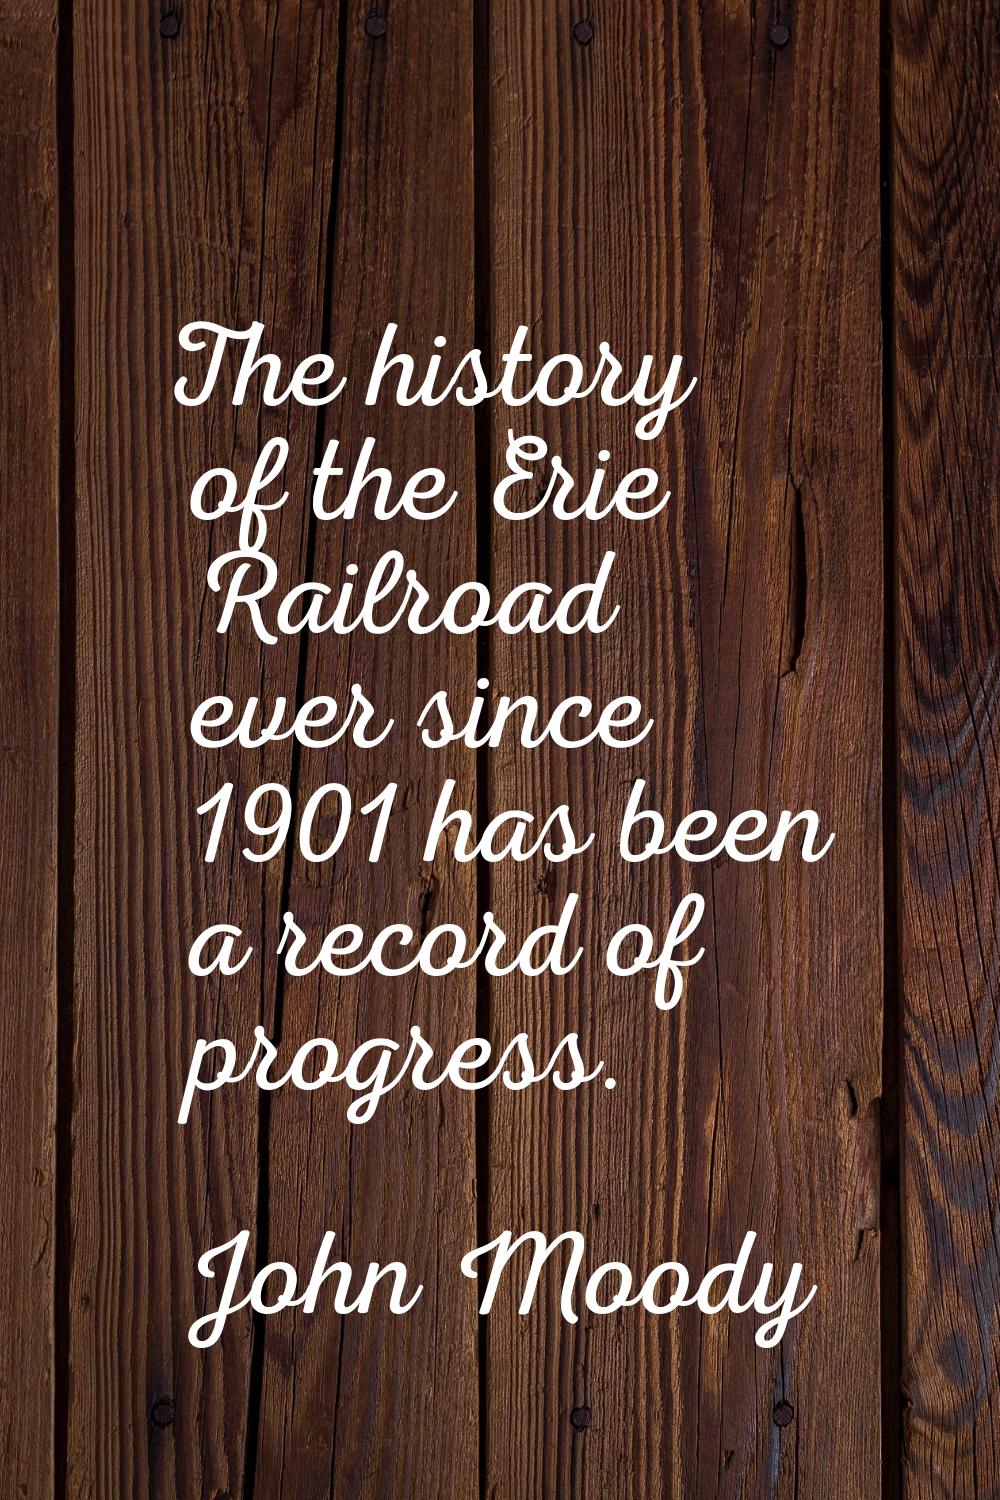 The history of the Erie Railroad ever since 1901 has been a record of progress.